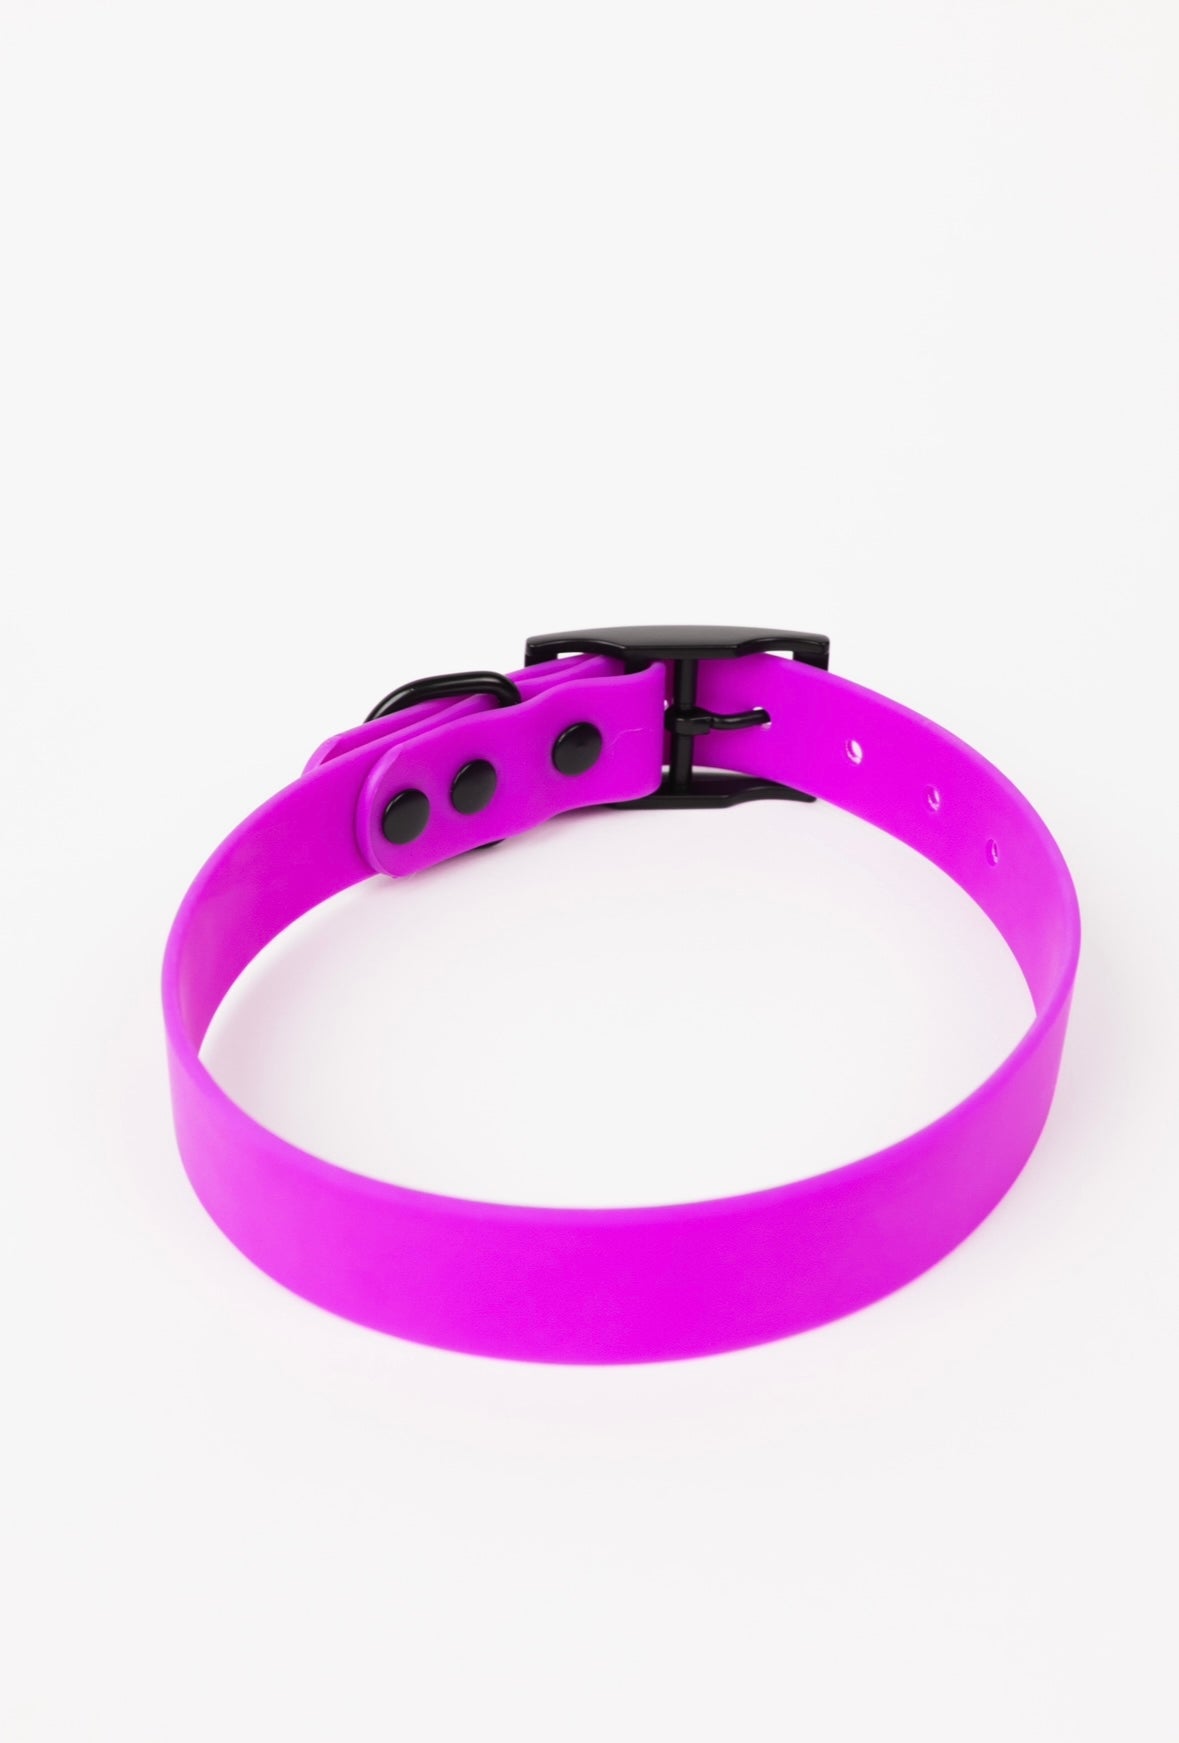 The Modern Dog Company - Electric Fuchsia Collar (Weather + Odor Resistant)